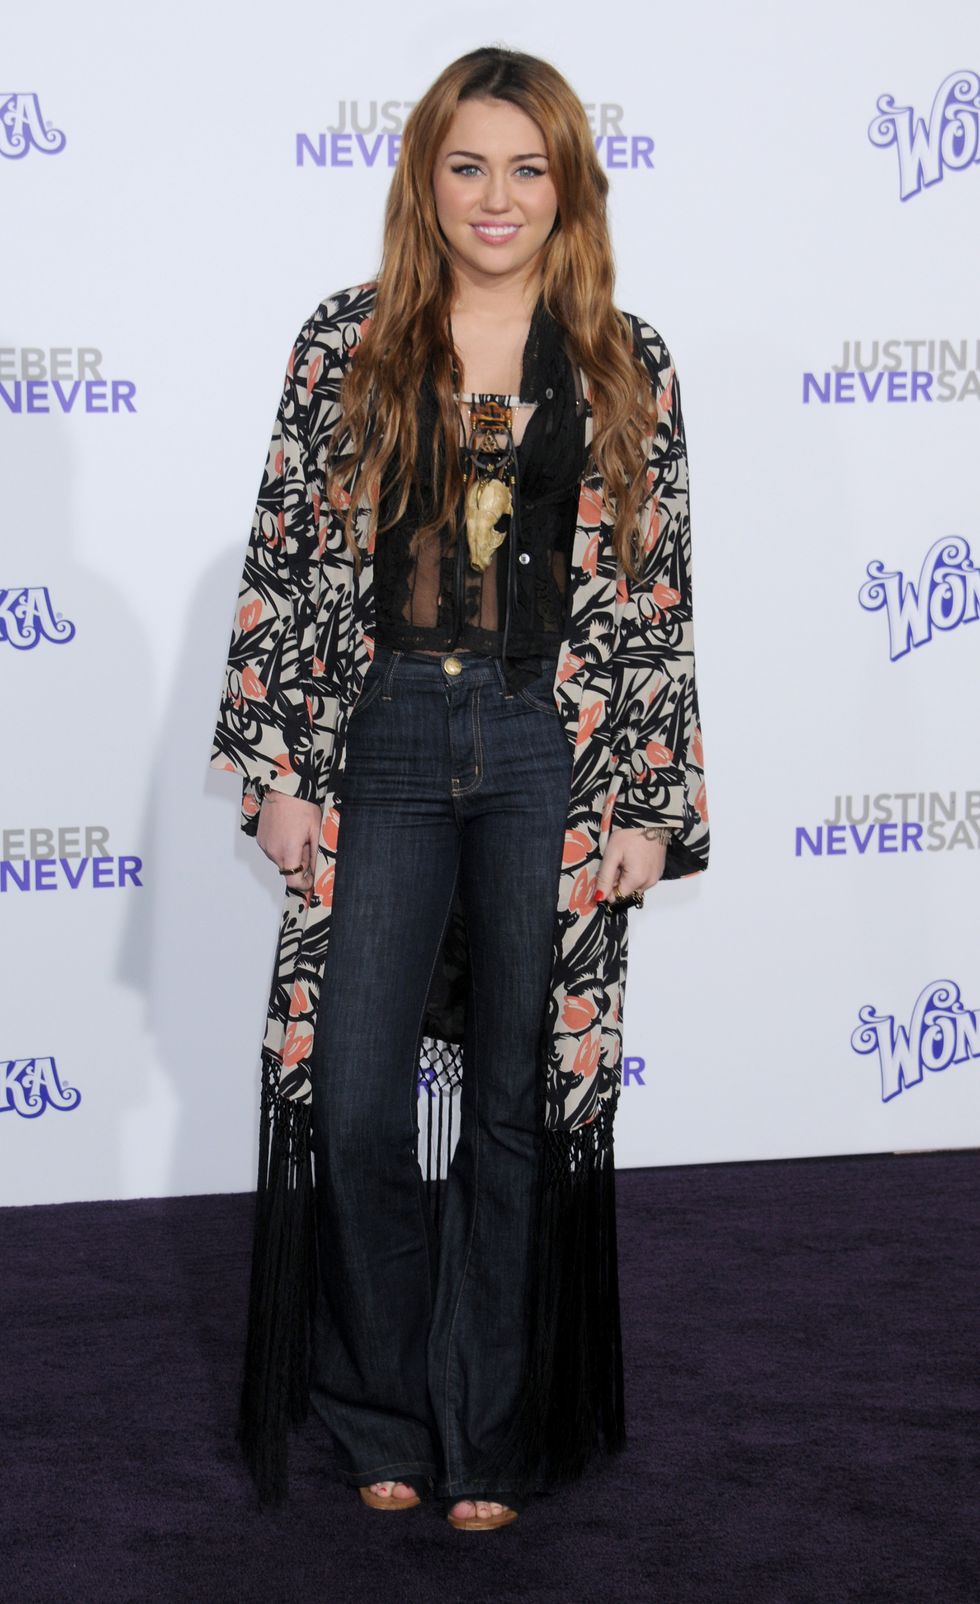 Miley Cyrus at the Justin Bieber Never Say Never premiere